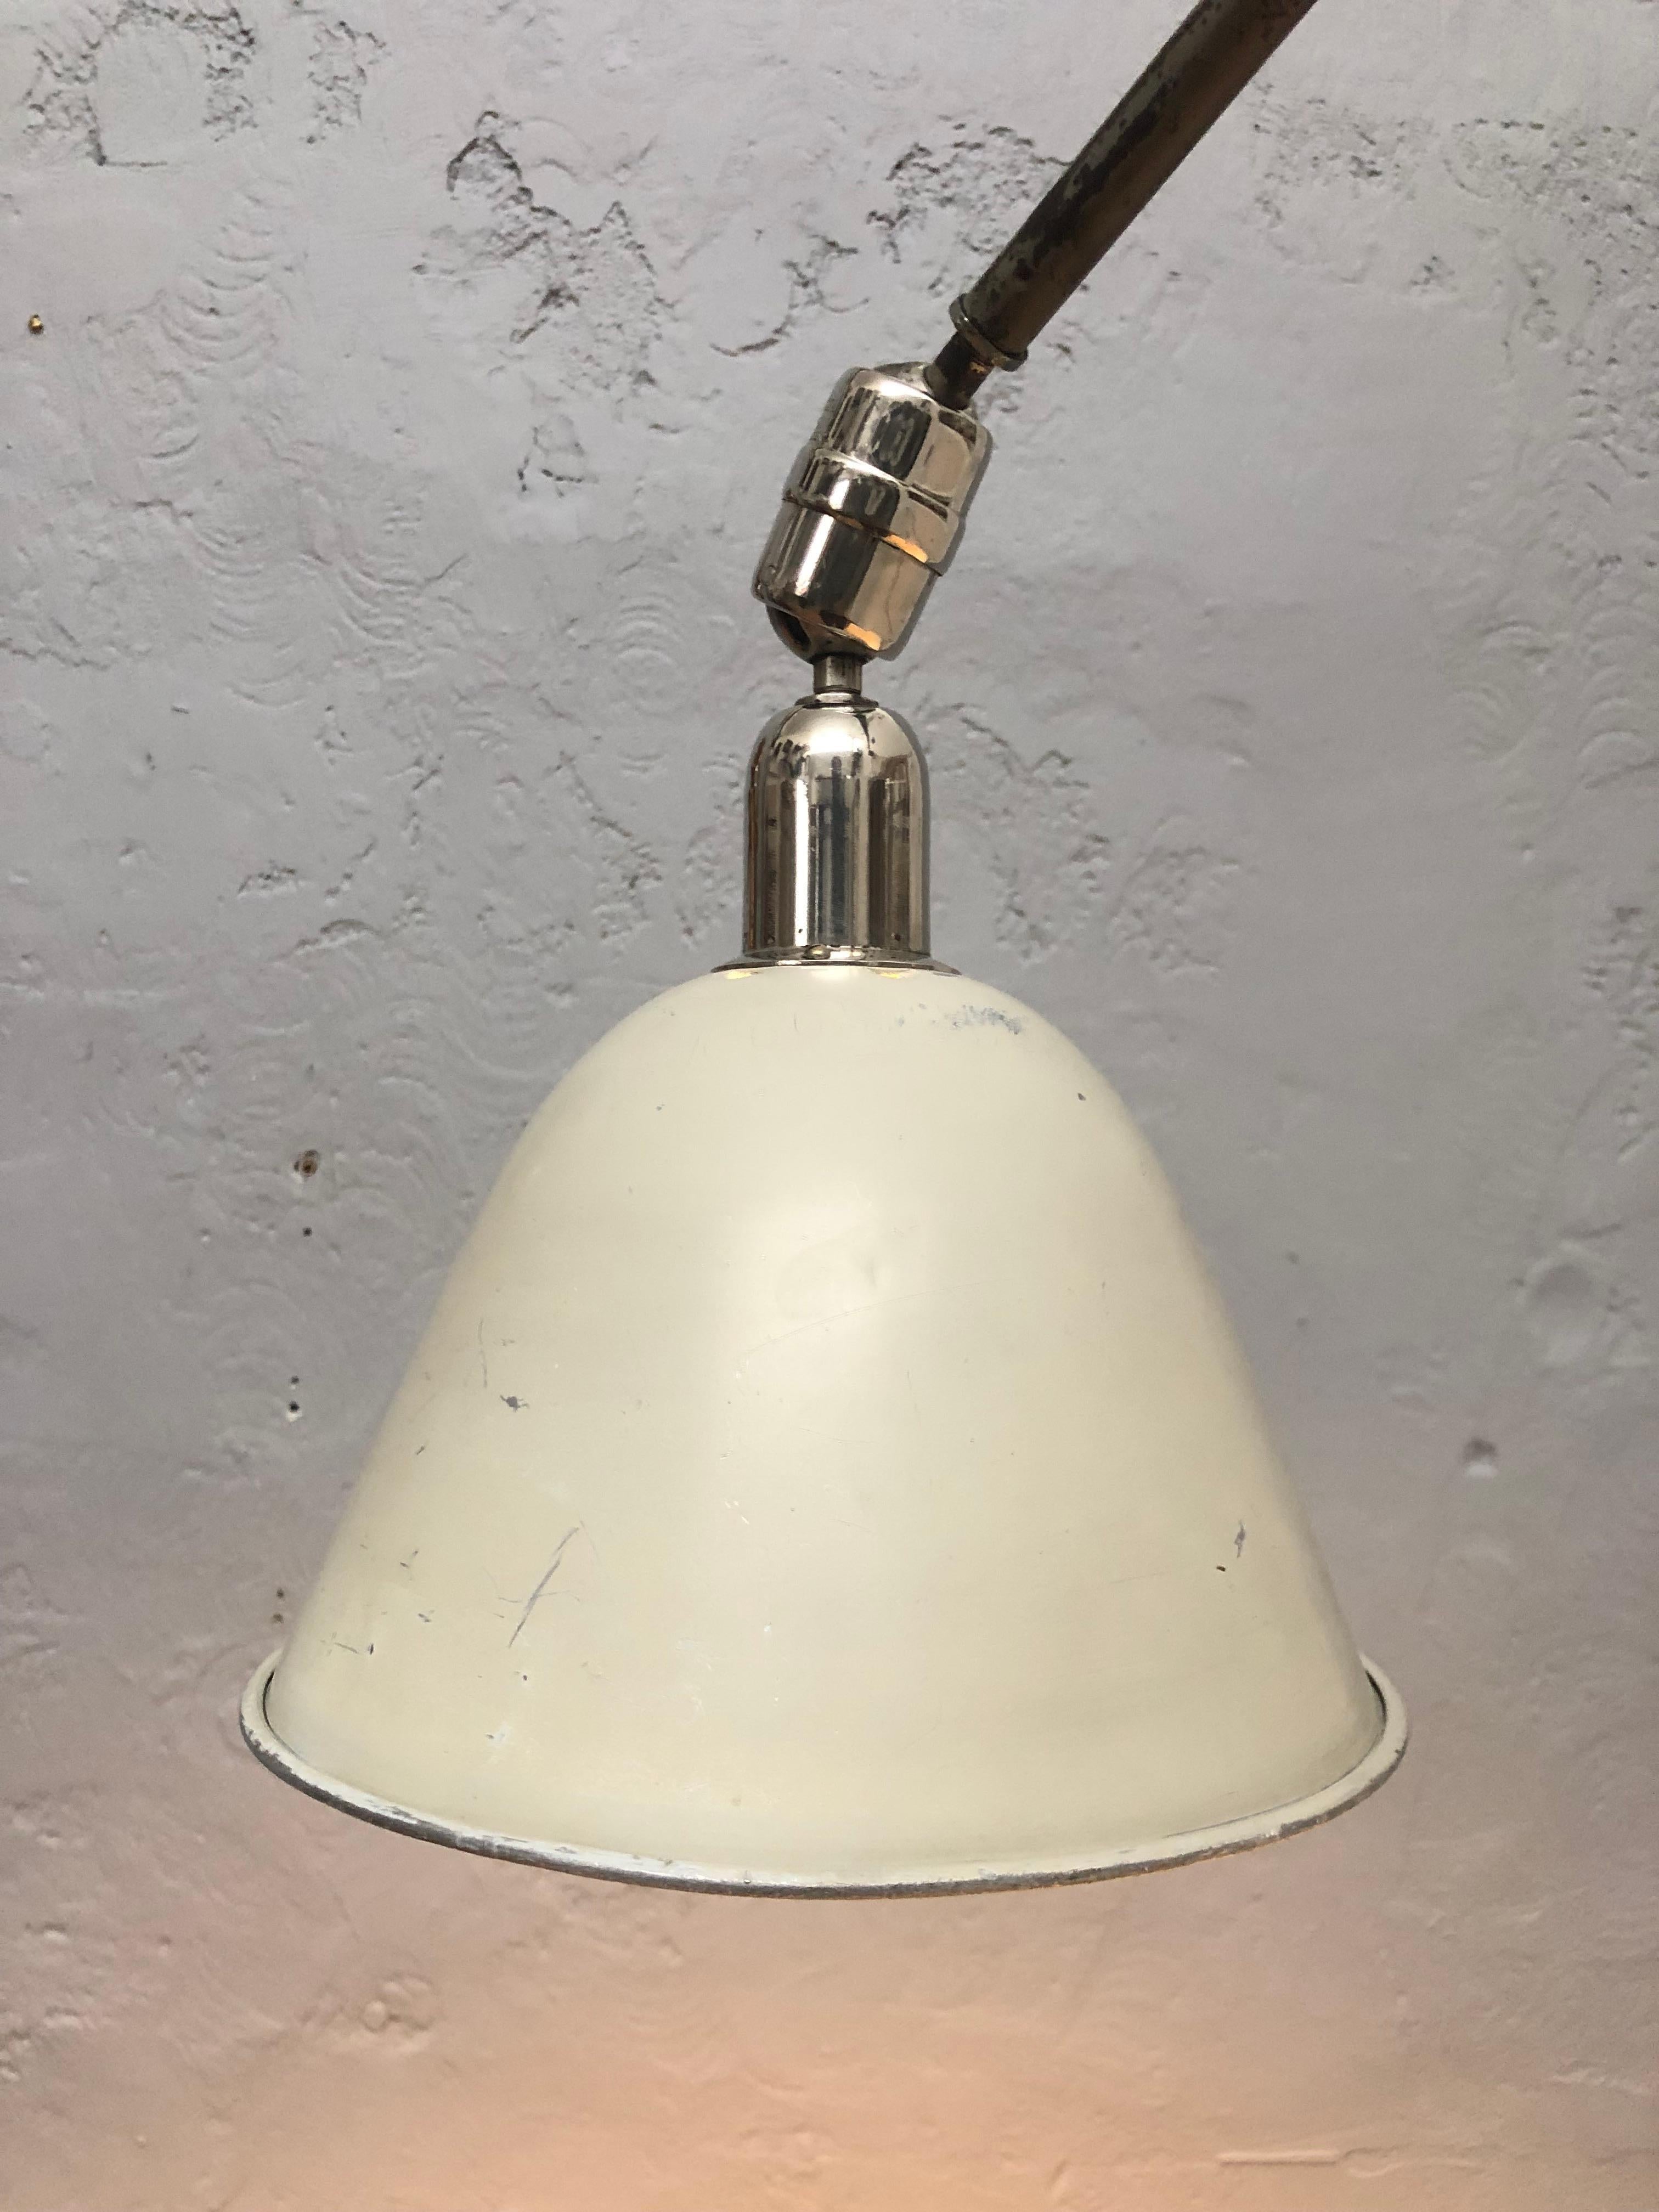 Classic Vintage Triplex Work Lamp by Johan Petter Johansson for ASEA of Sweden For Sale 6